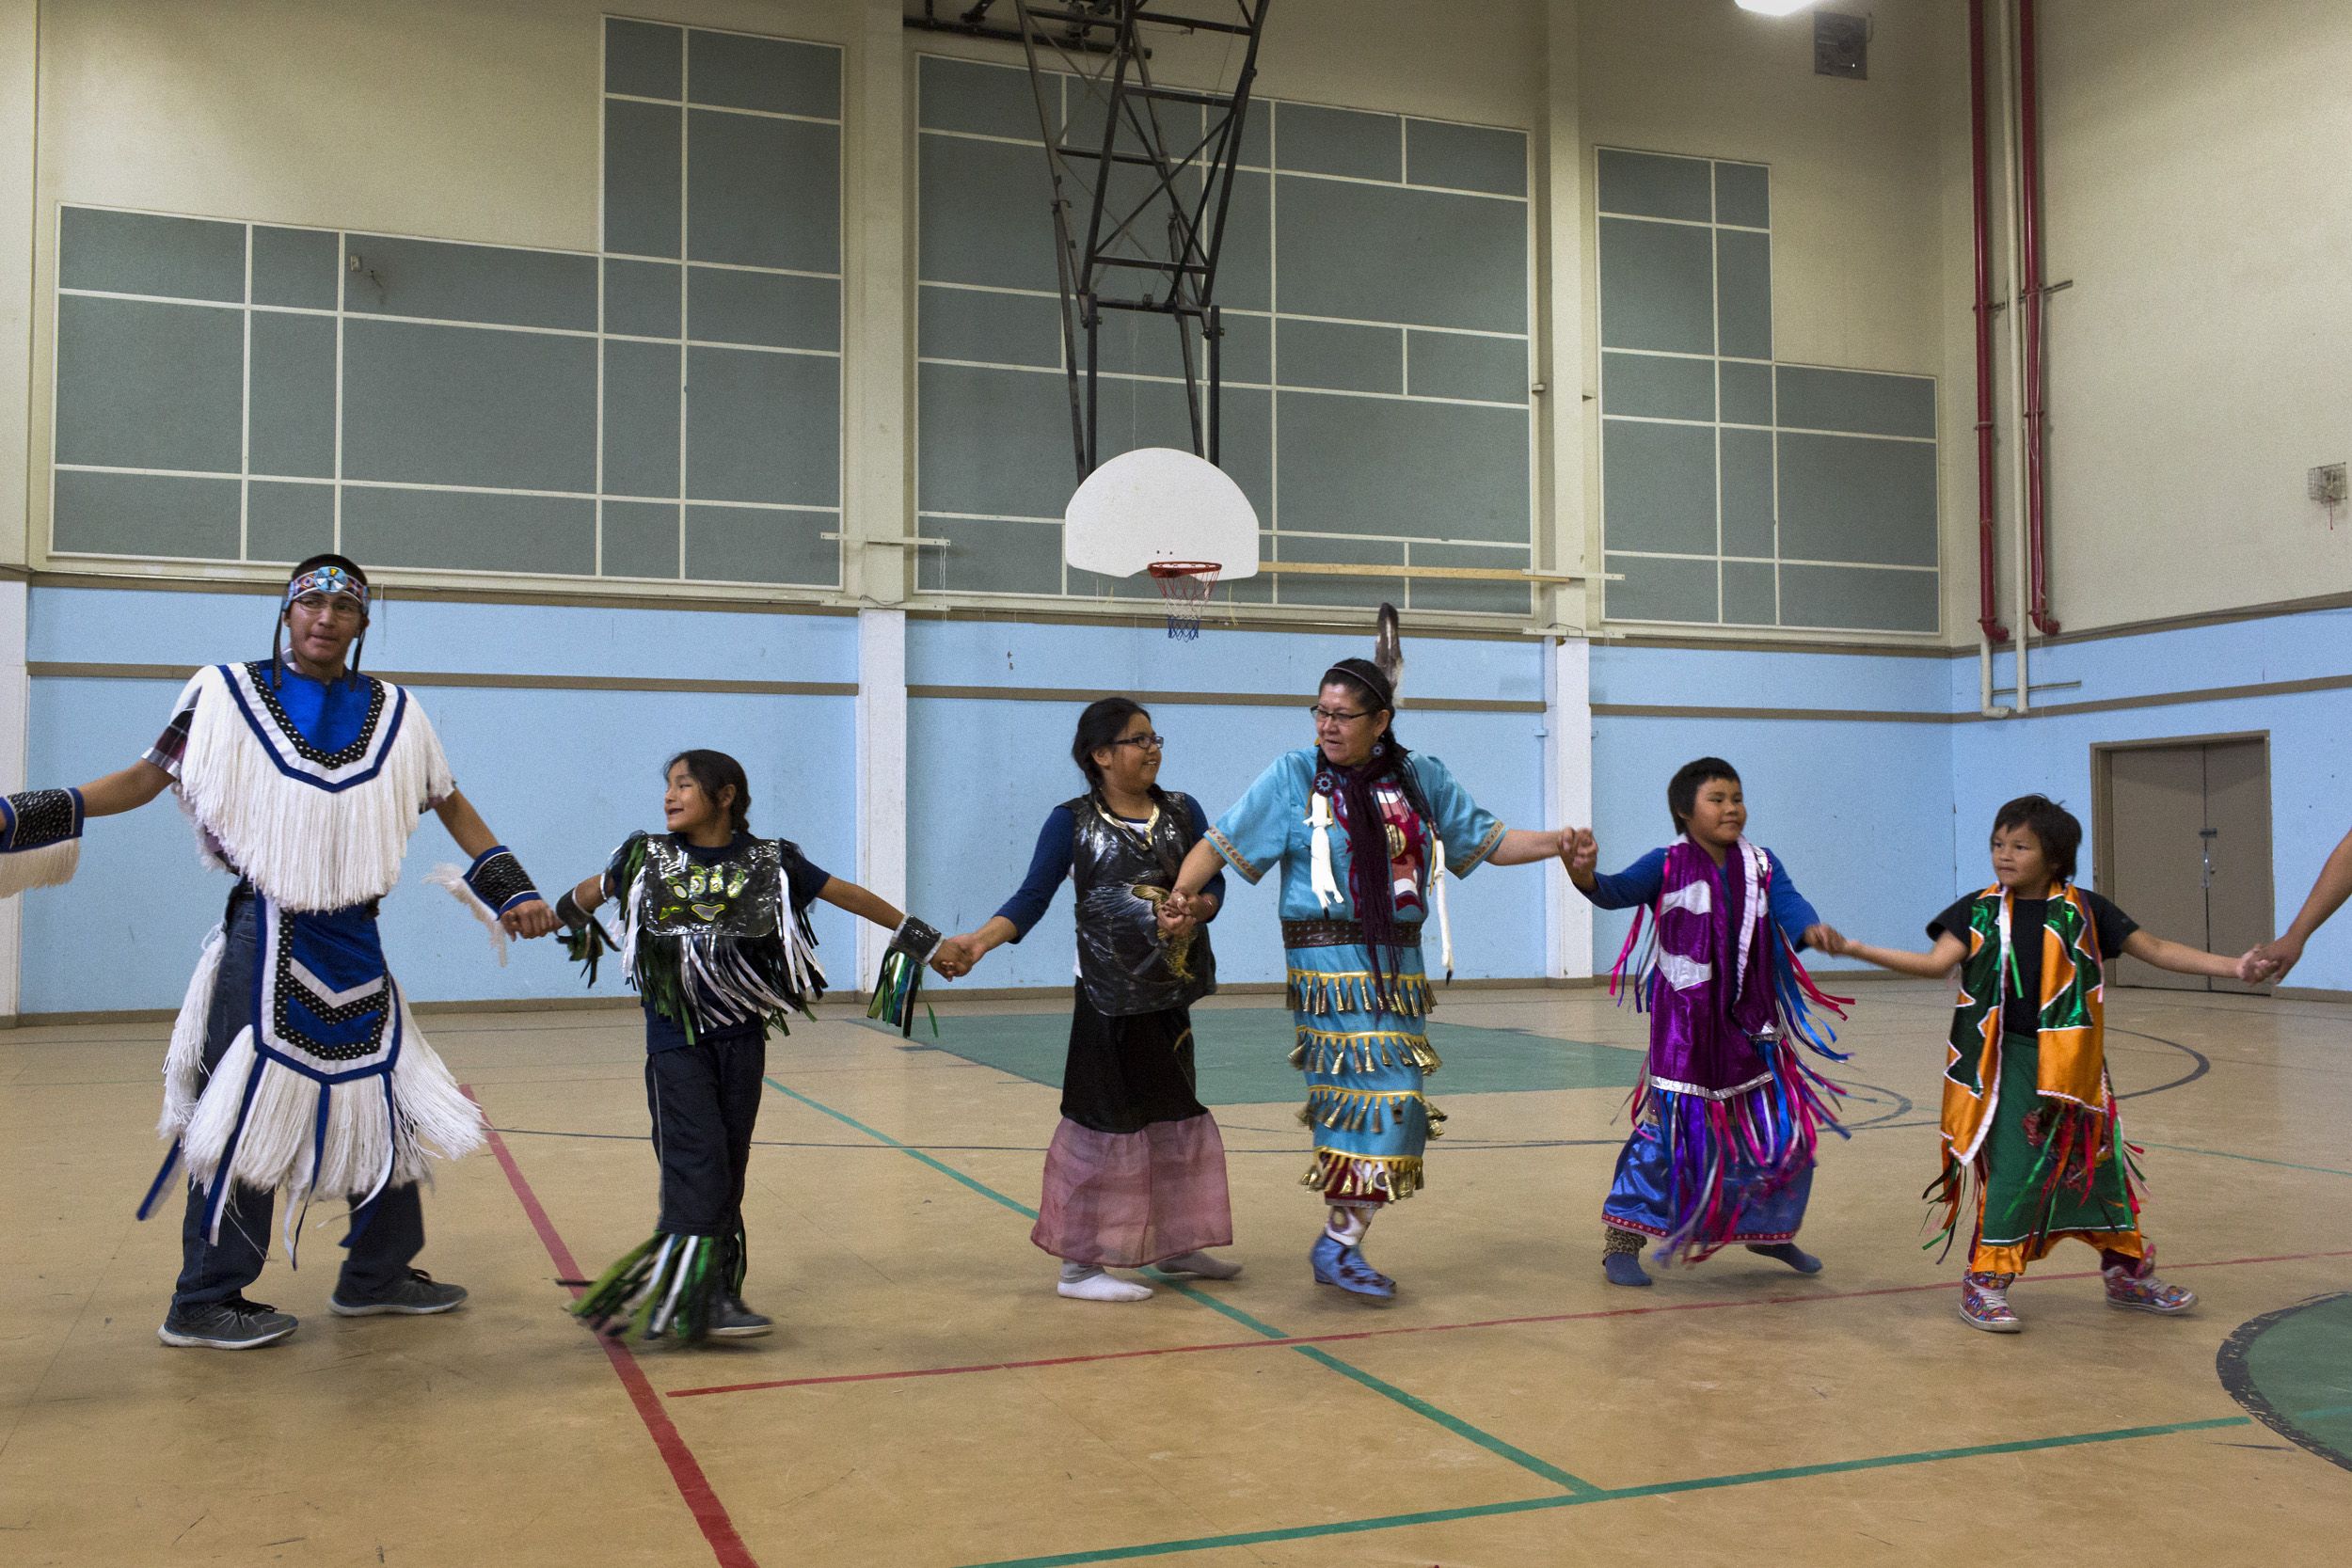 Dancers perform during a ceremony in the Reg Louttit Arena. For many in the community, a return to traditional practices offers a hope for healing. Image by David Maurice Smith/Oculi. Canada, 2016.